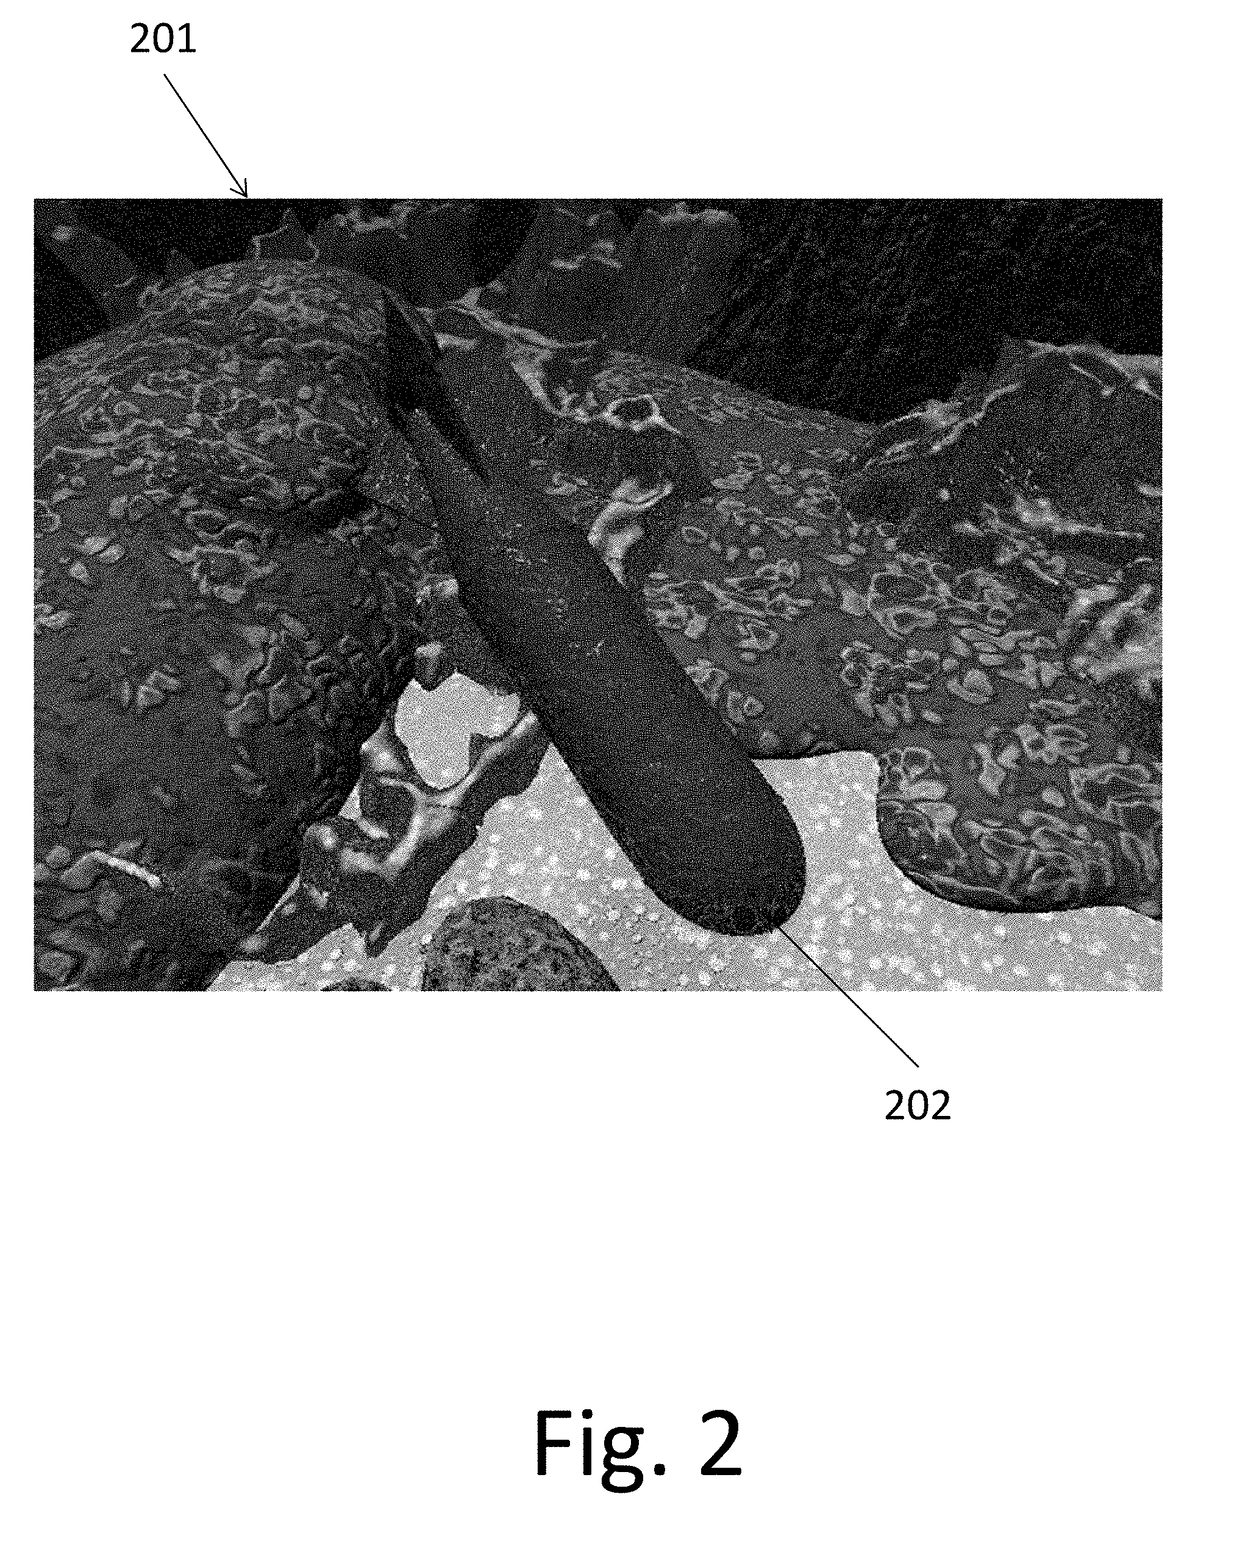 Munitions and Ordnance Remediation Blanket (MORB) and Methods of Using Same